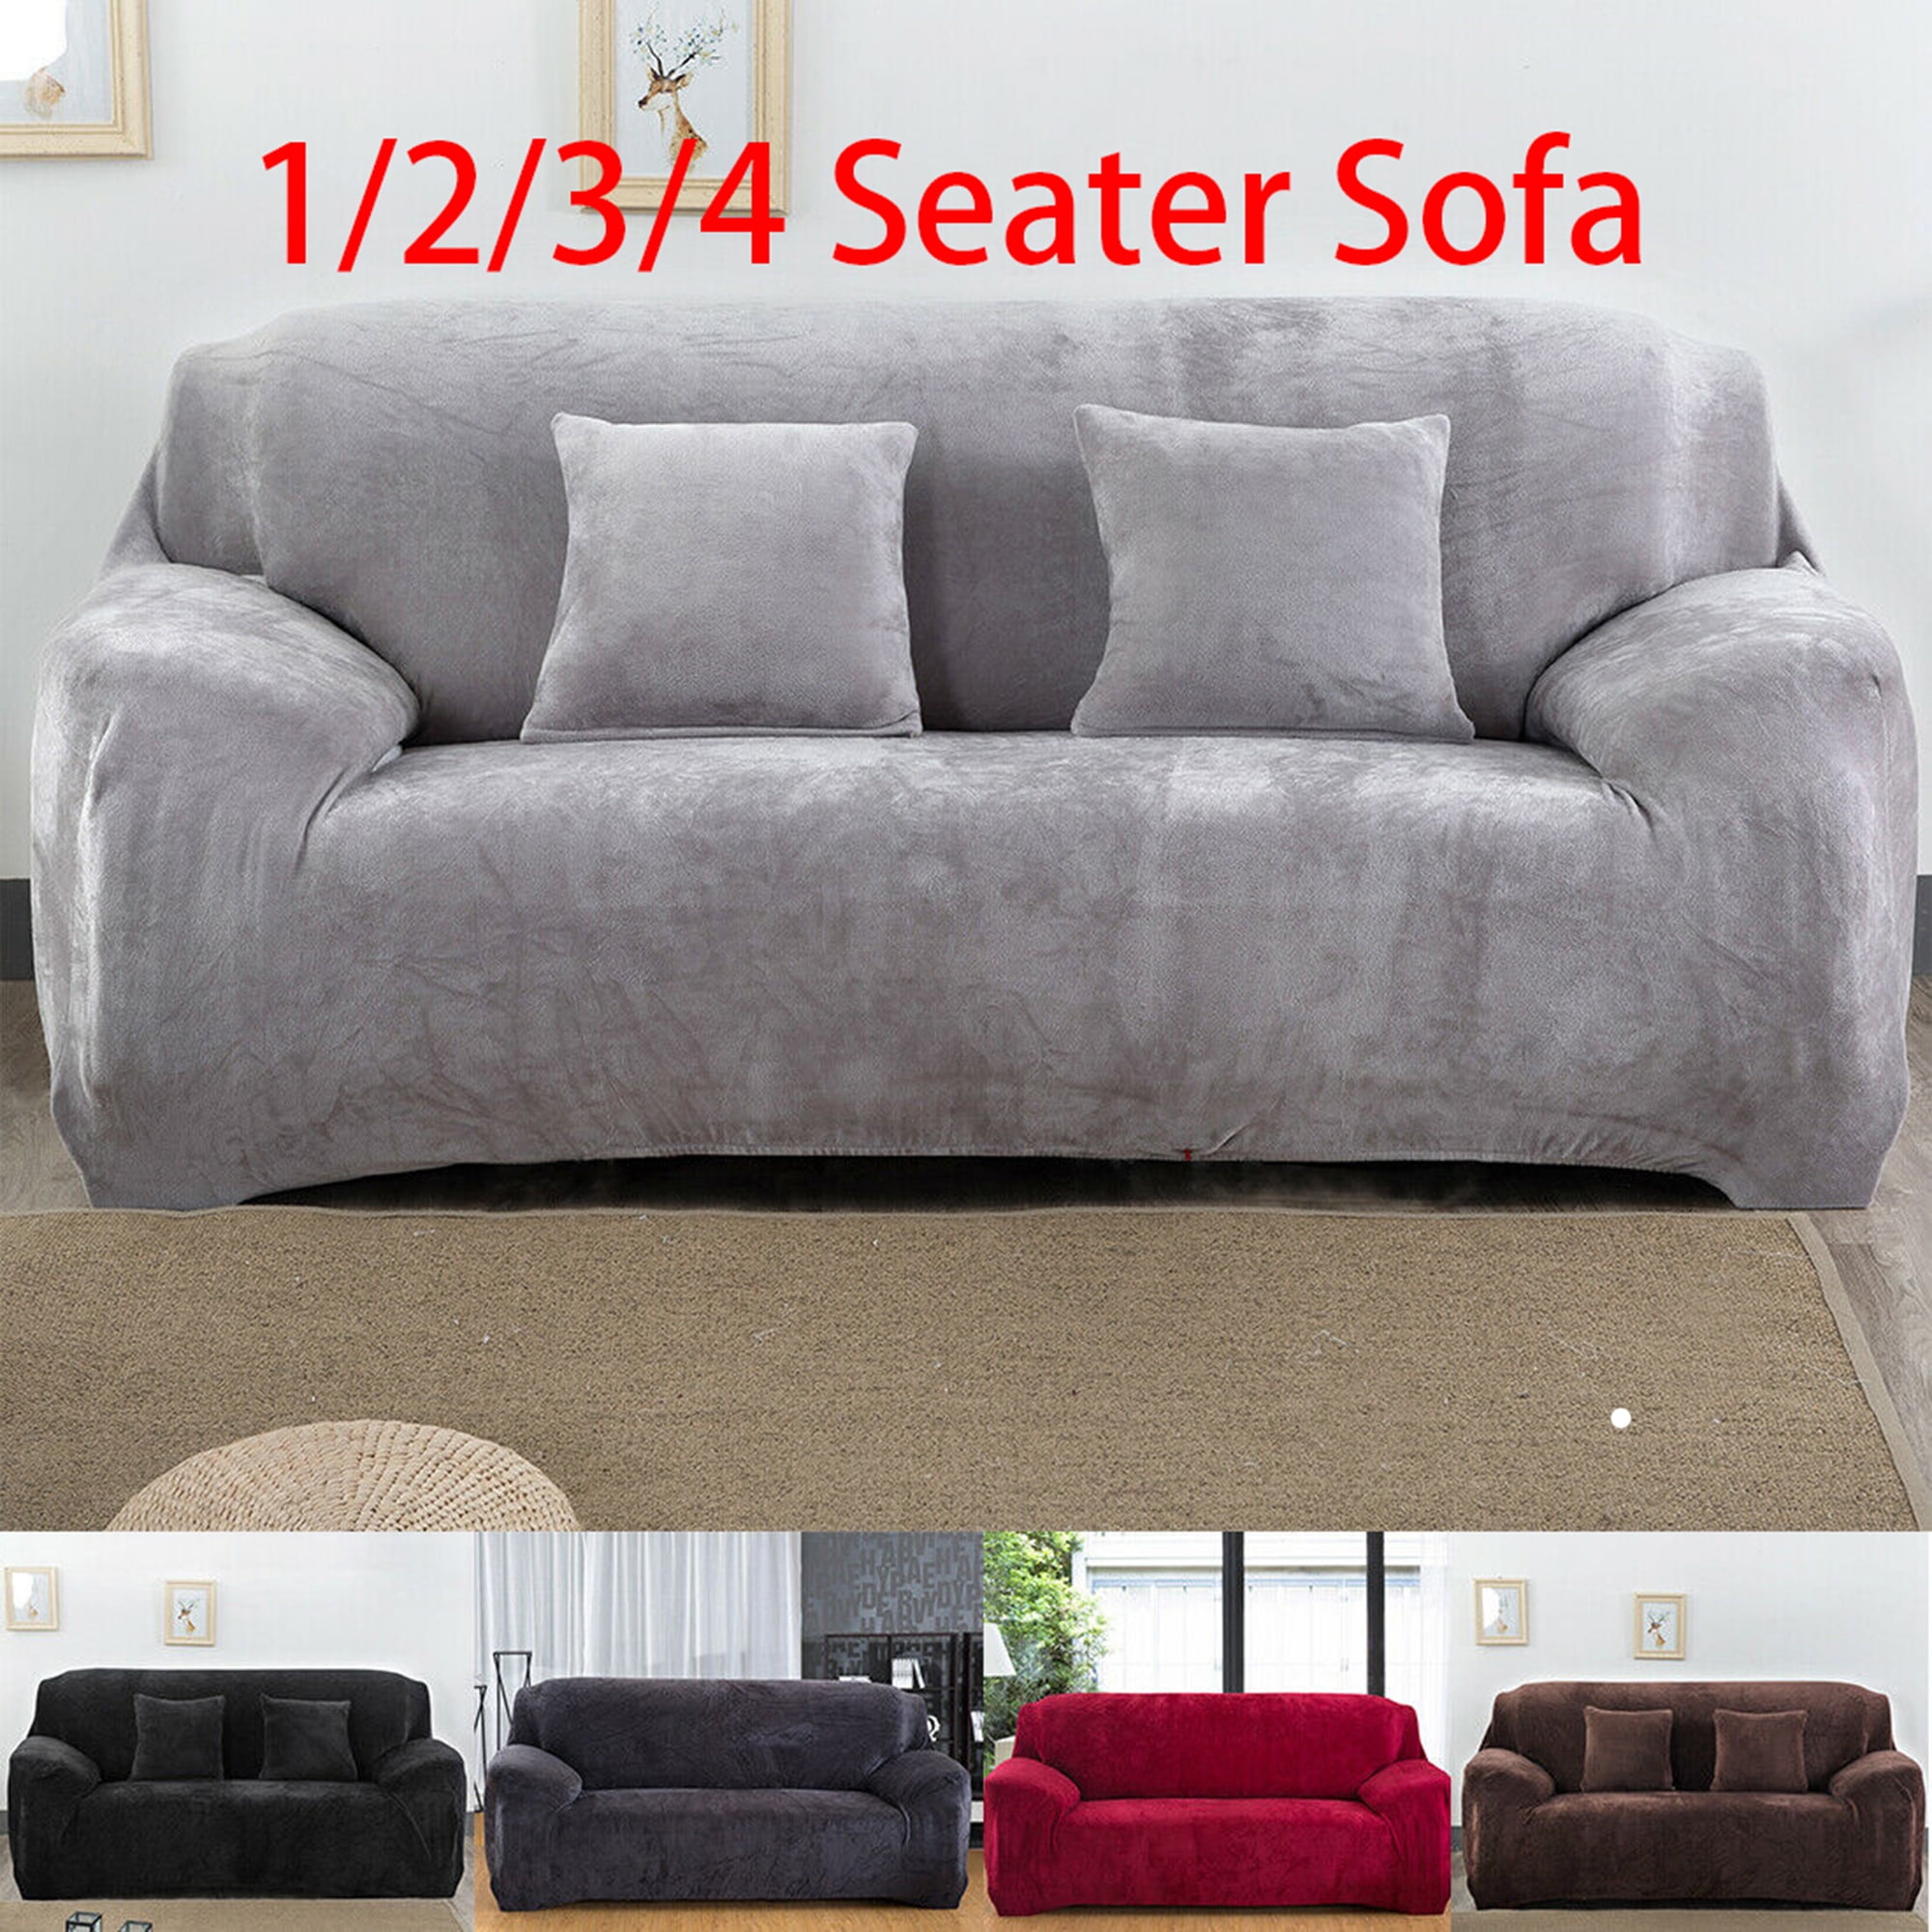 Details about   4 Seater Slipcover Sofa Covers Spandex Stretch Couch Cover Furniture Protector A